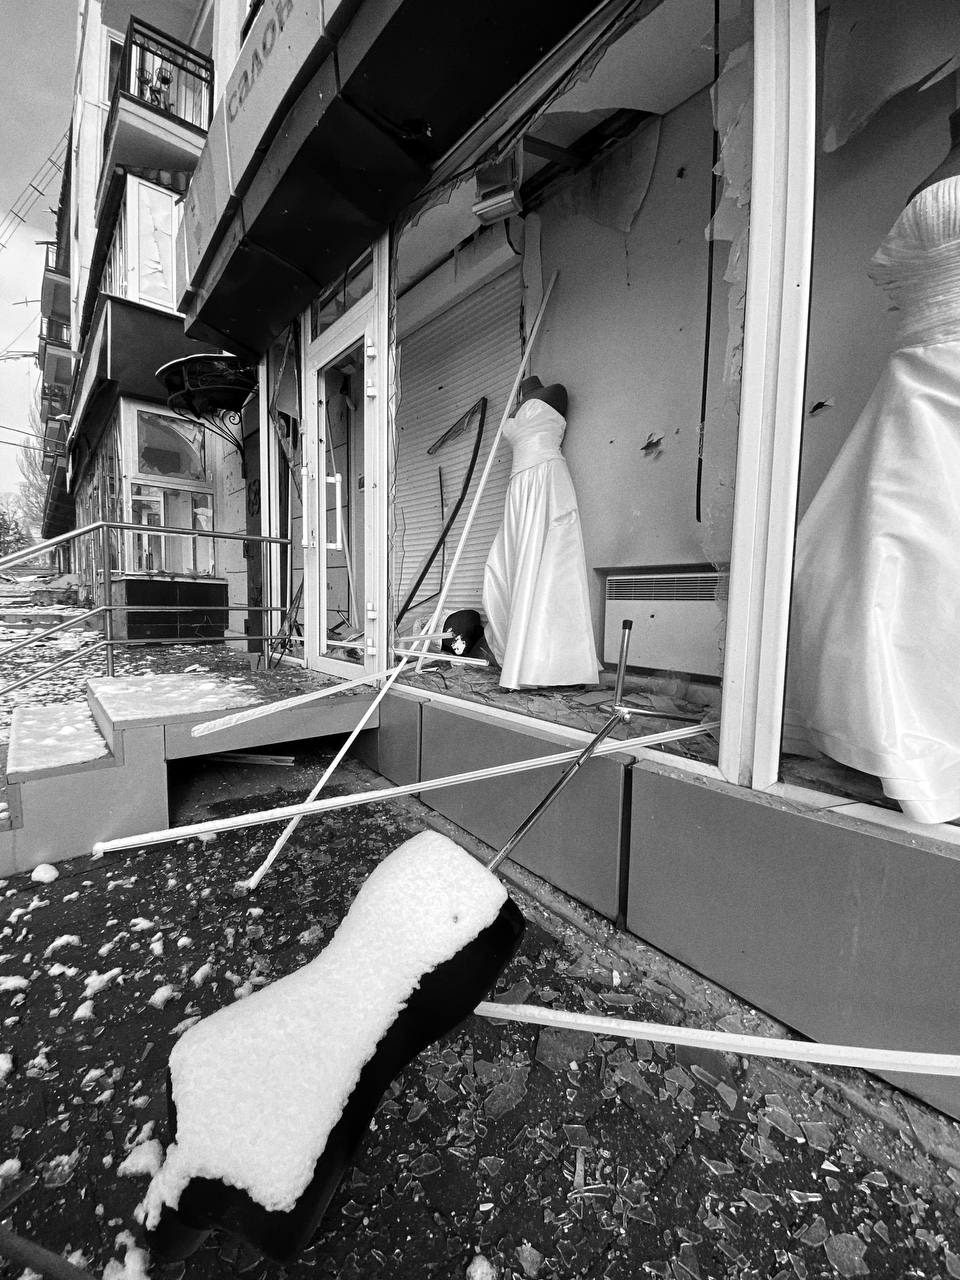 A damaged storefront is seen on March 9. - (The city has been under constant shelling for weeks.)